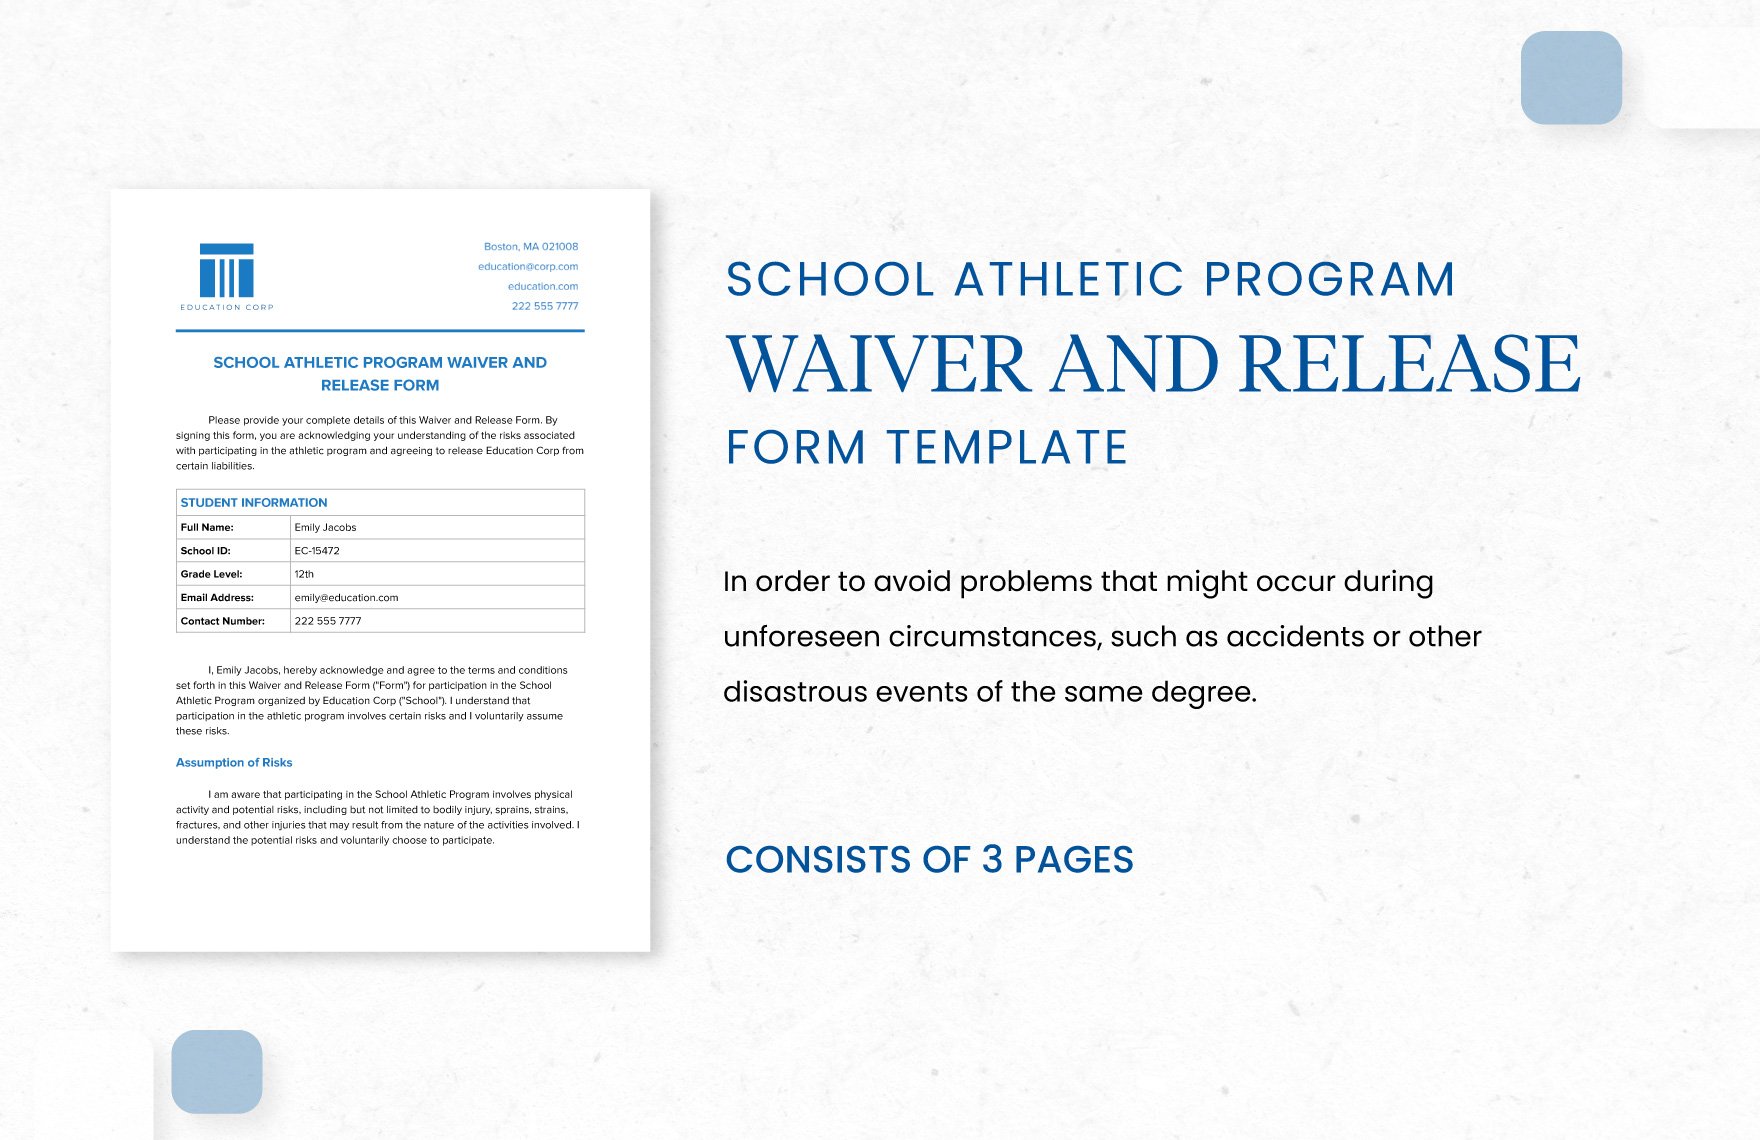 School Athletic Program Waiver and Release Form Template